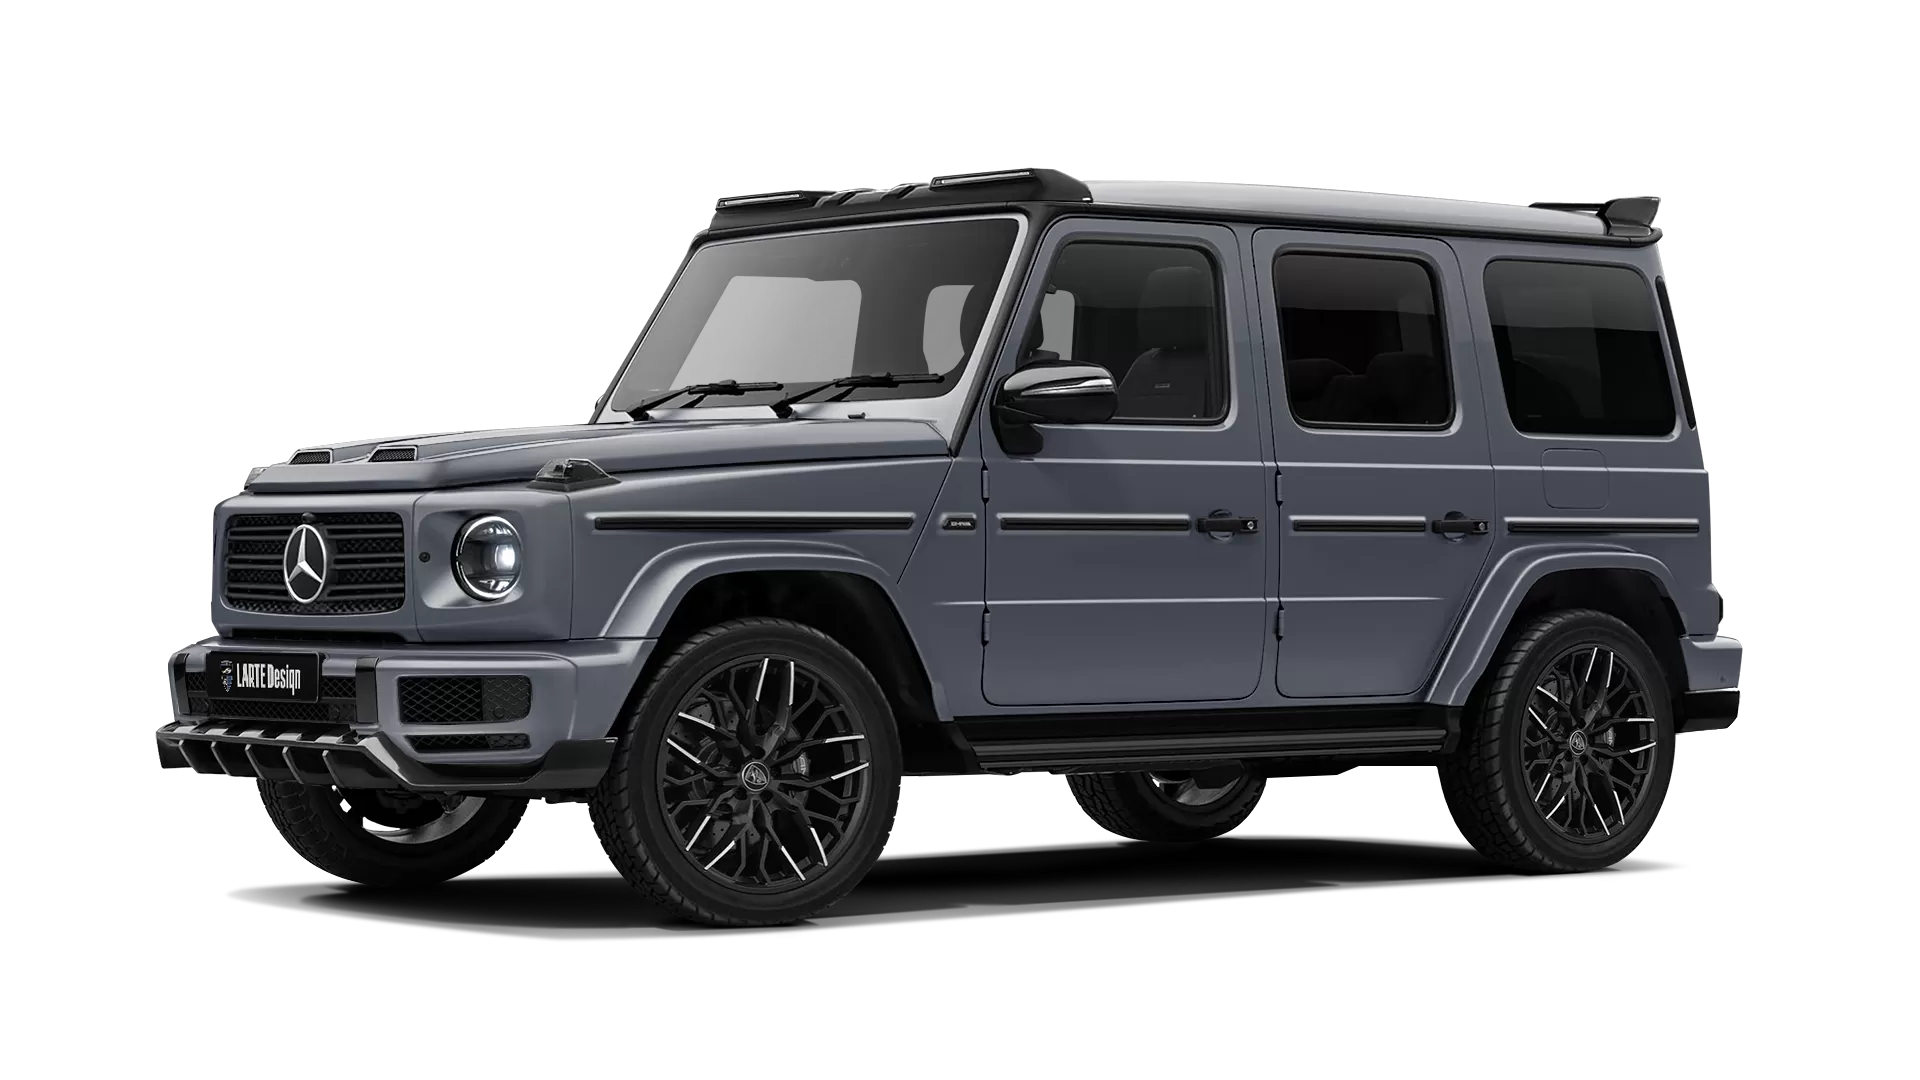 Mercedes G class W463 with painted body kit: front view shown in Platinum Magno